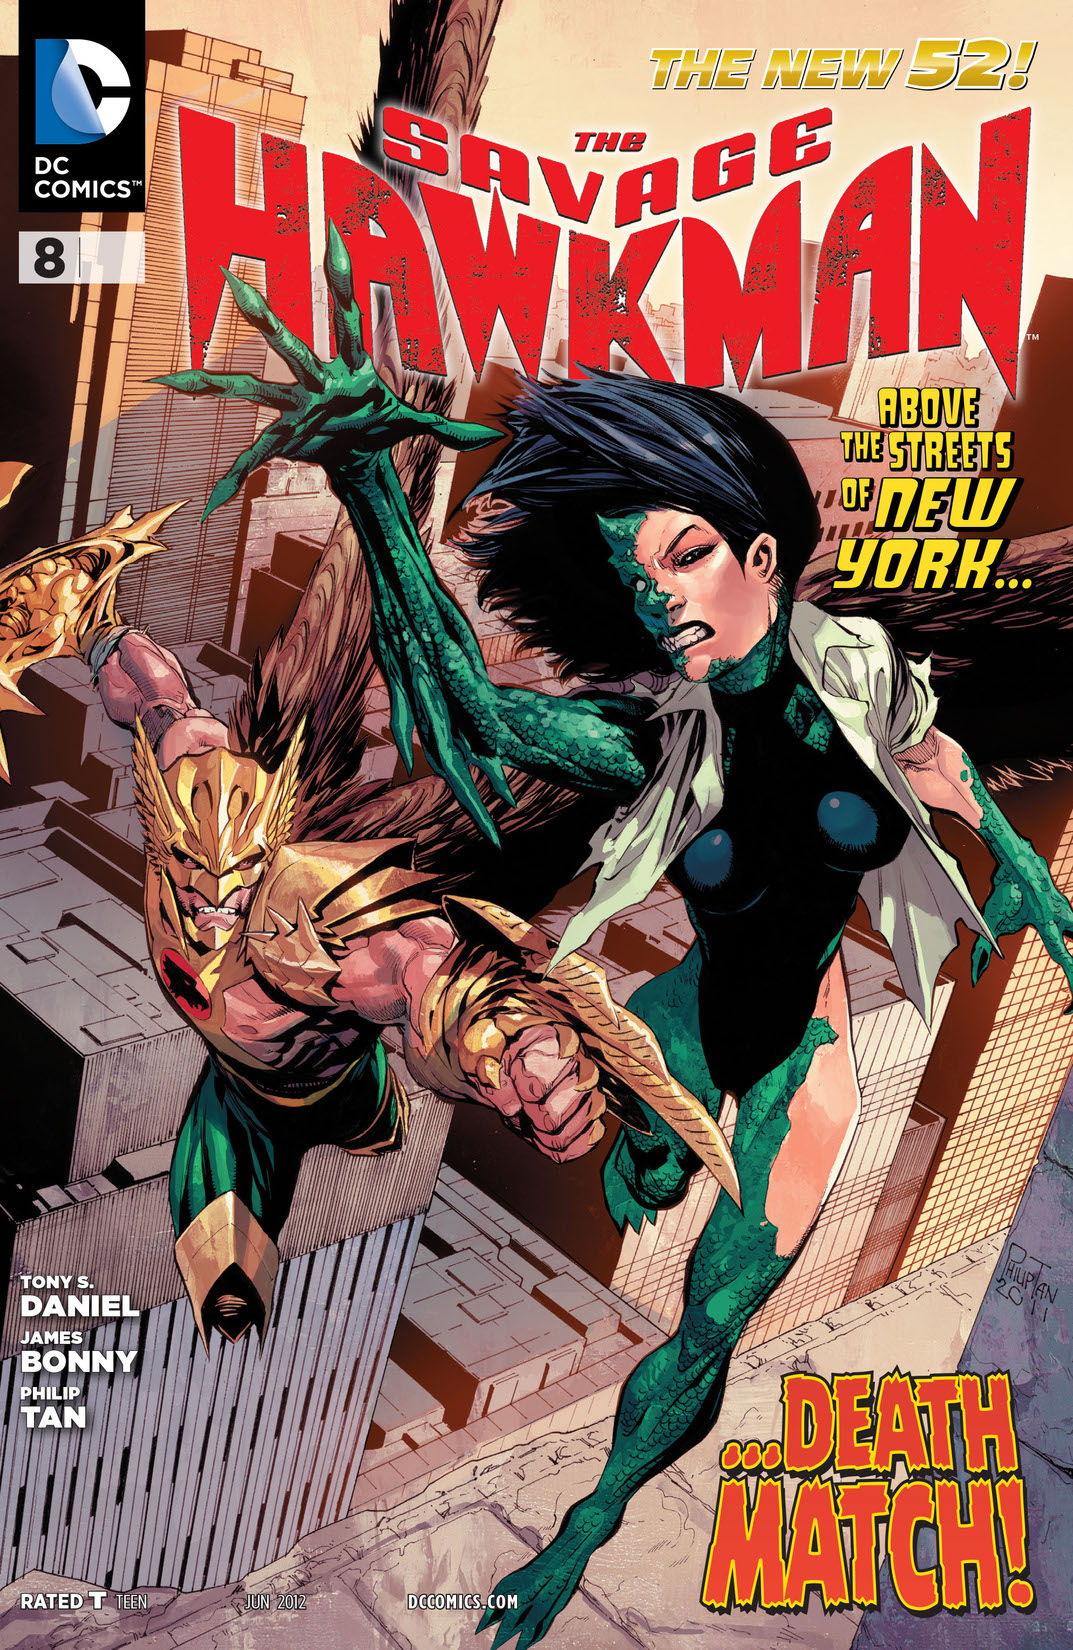 The Savage Hawkman #8 preview images